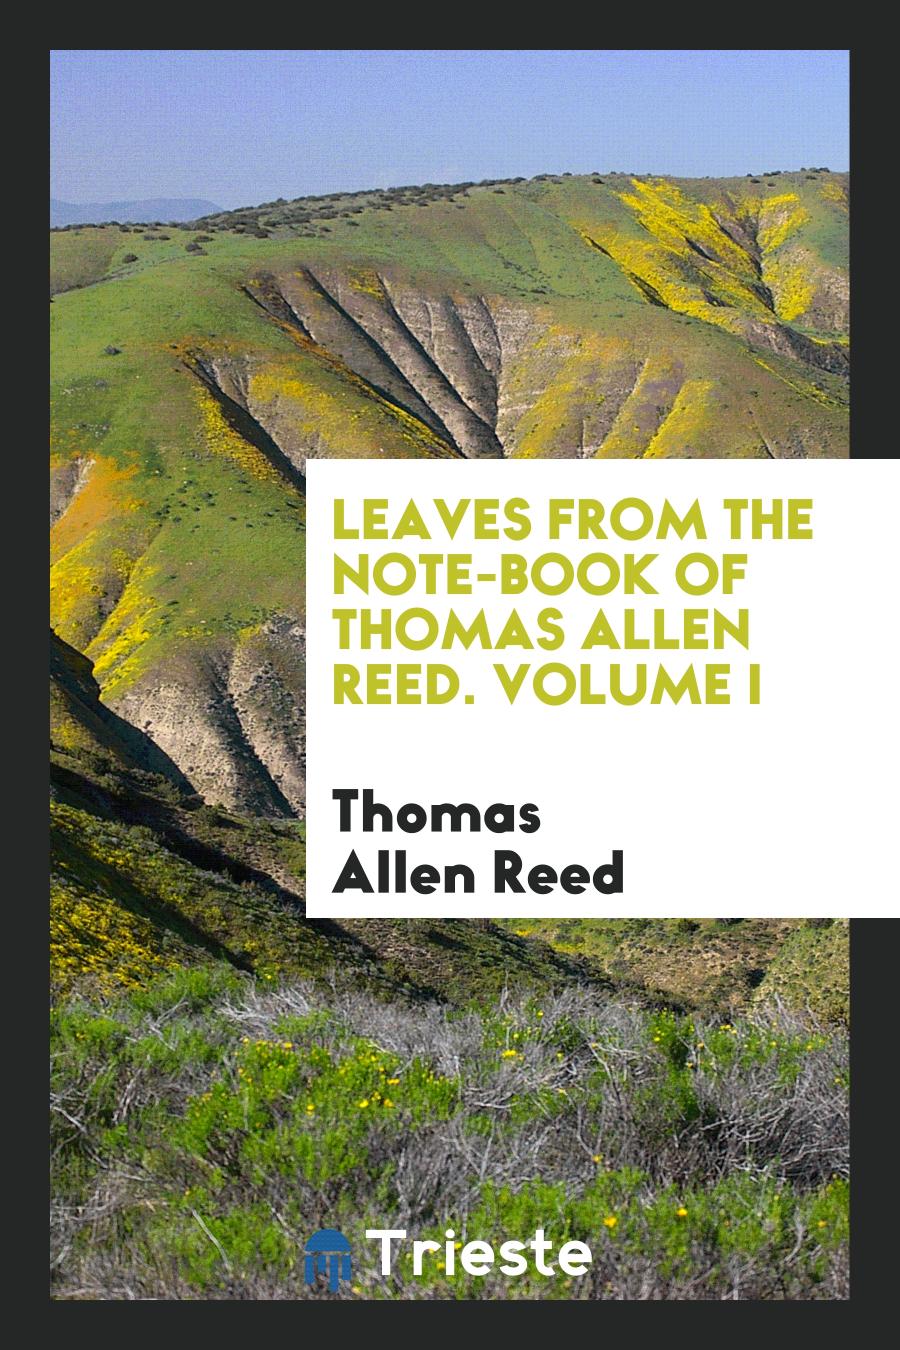 Leaves from the note-book of Thomas Allen Reed. Volume I